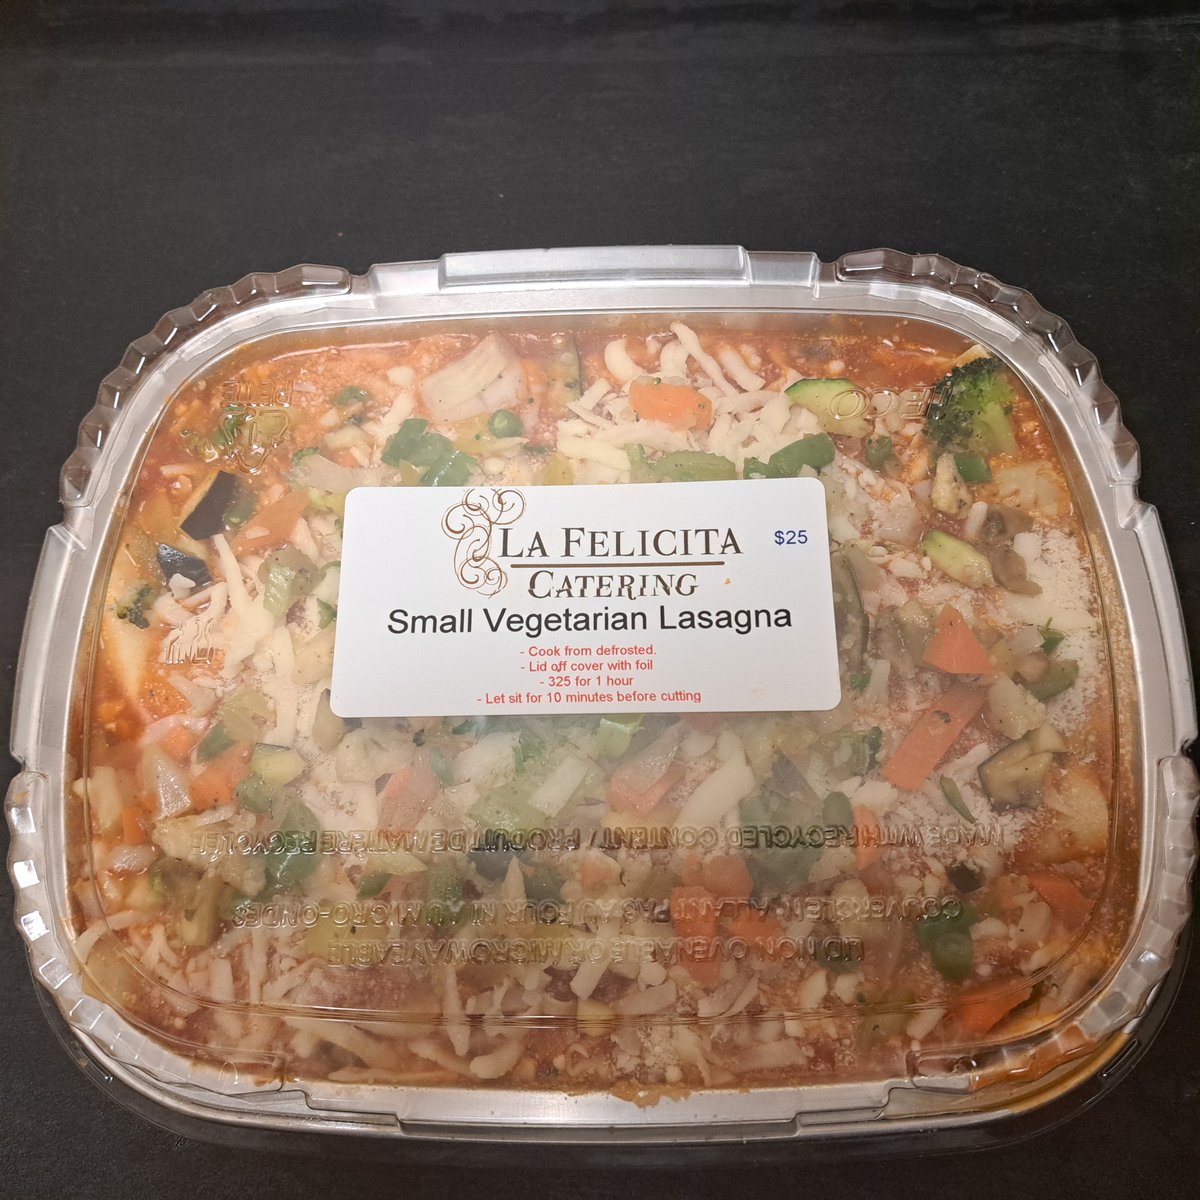 Stocking up our retail fridge and freezer!  If you come this Saturday (Apr. 27), ask for free garlic bread ($7 value) on your order of $50+  #Lasagna #Ravioli #Cannelloni #Tortellini #Parmigiana #PenneToscana #Meatballs #StuffedPeppers
2351 Royal Windsor Dr. Unit 9 Mississauga